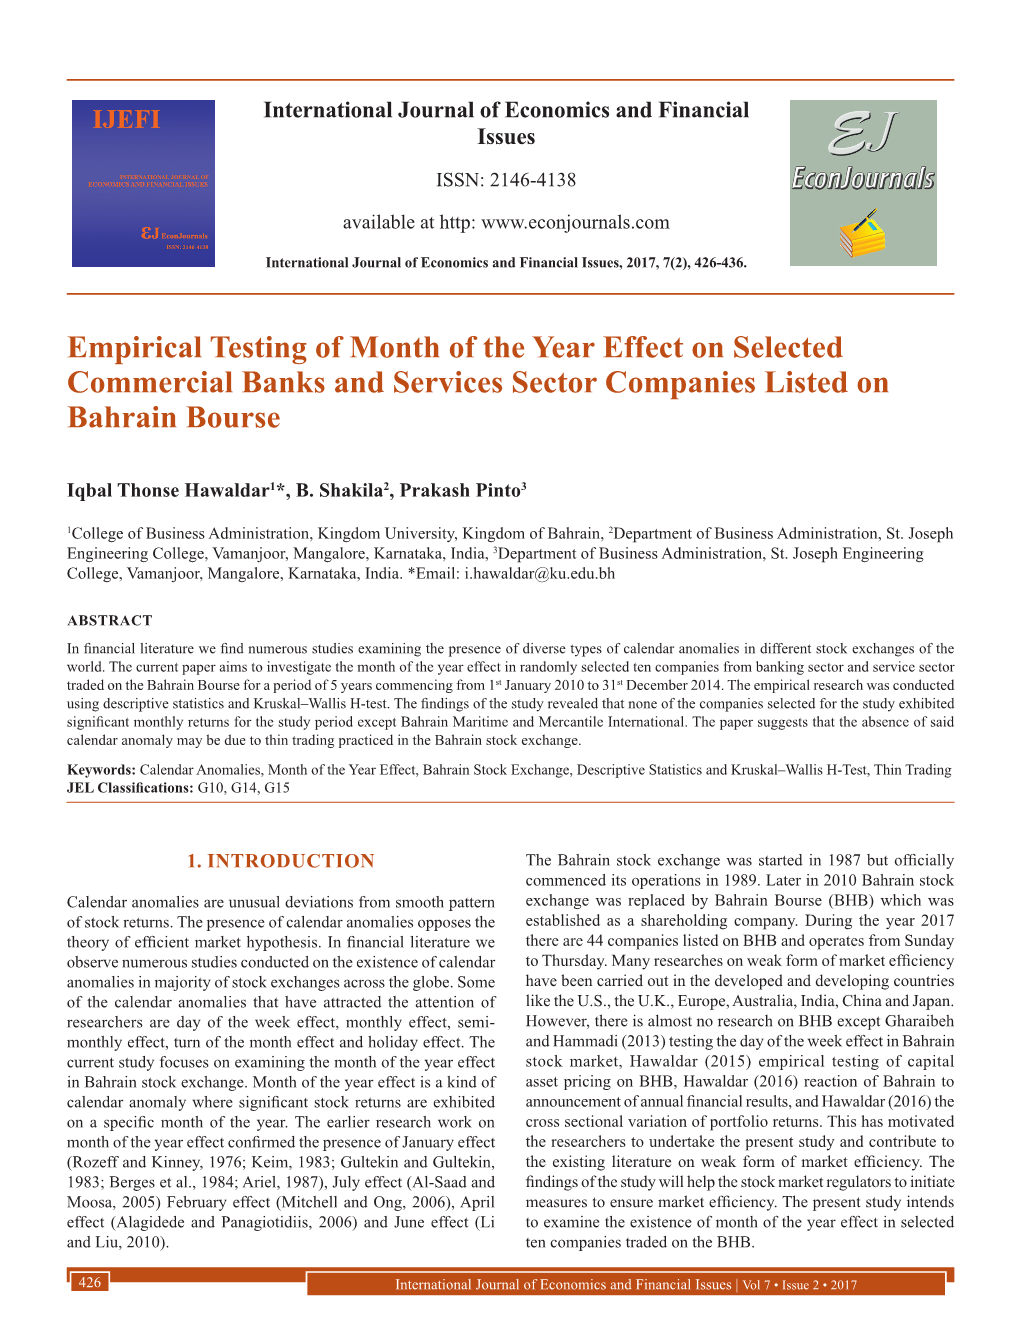 Empirical Testing of Month of the Year Effect on Selected Commercial Banks and Services Sector Companies Listed on Bahrain Bourse